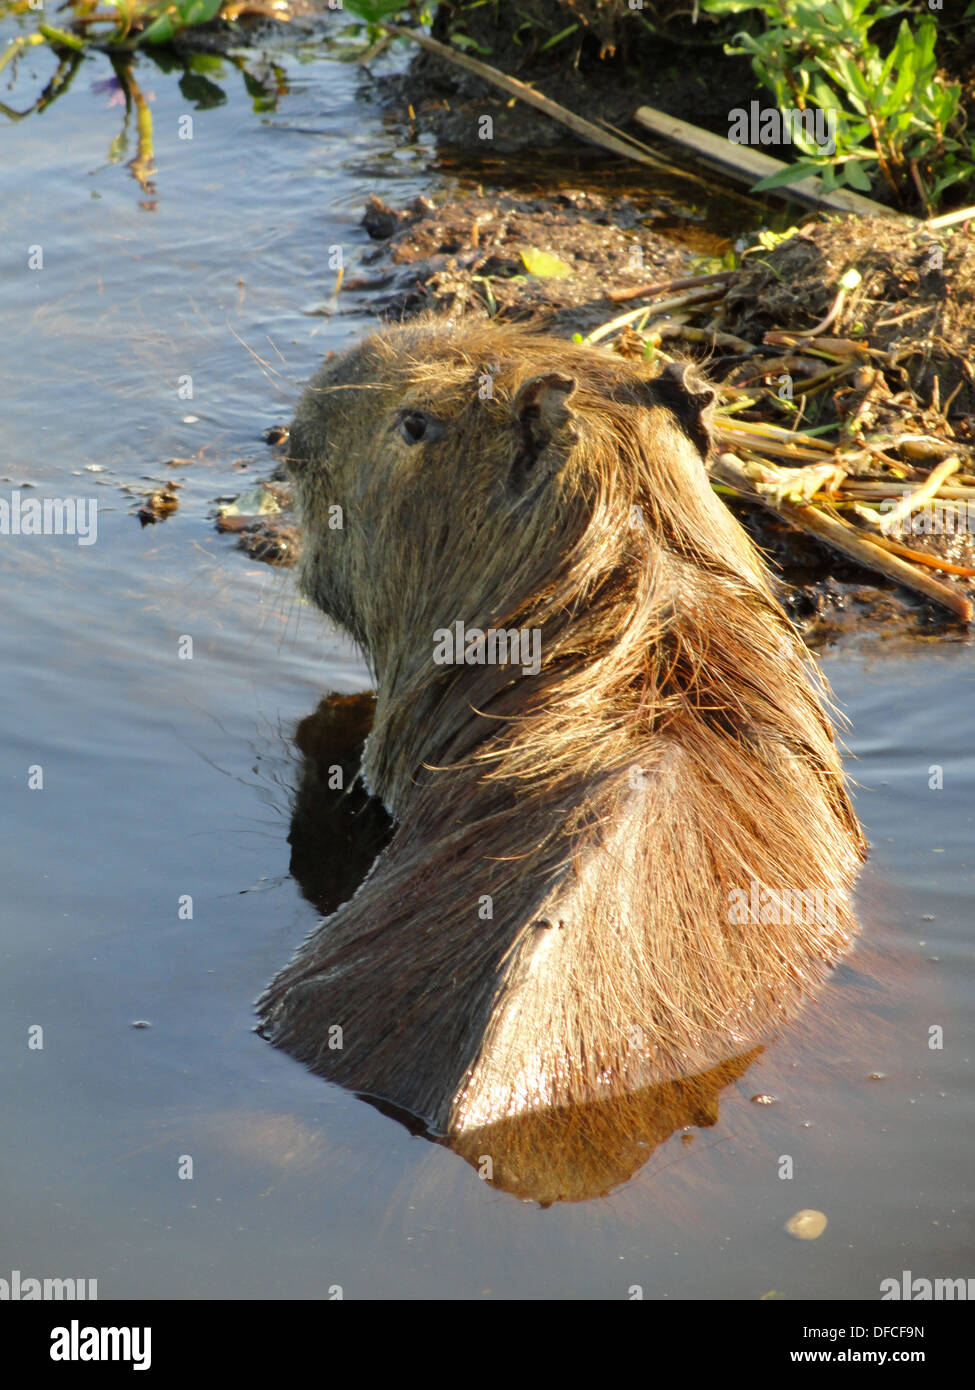 A Capybara, the worlds largest species of rodent, swimming in a lake in the Ibera wetlands in northern Argentina Stock Photo